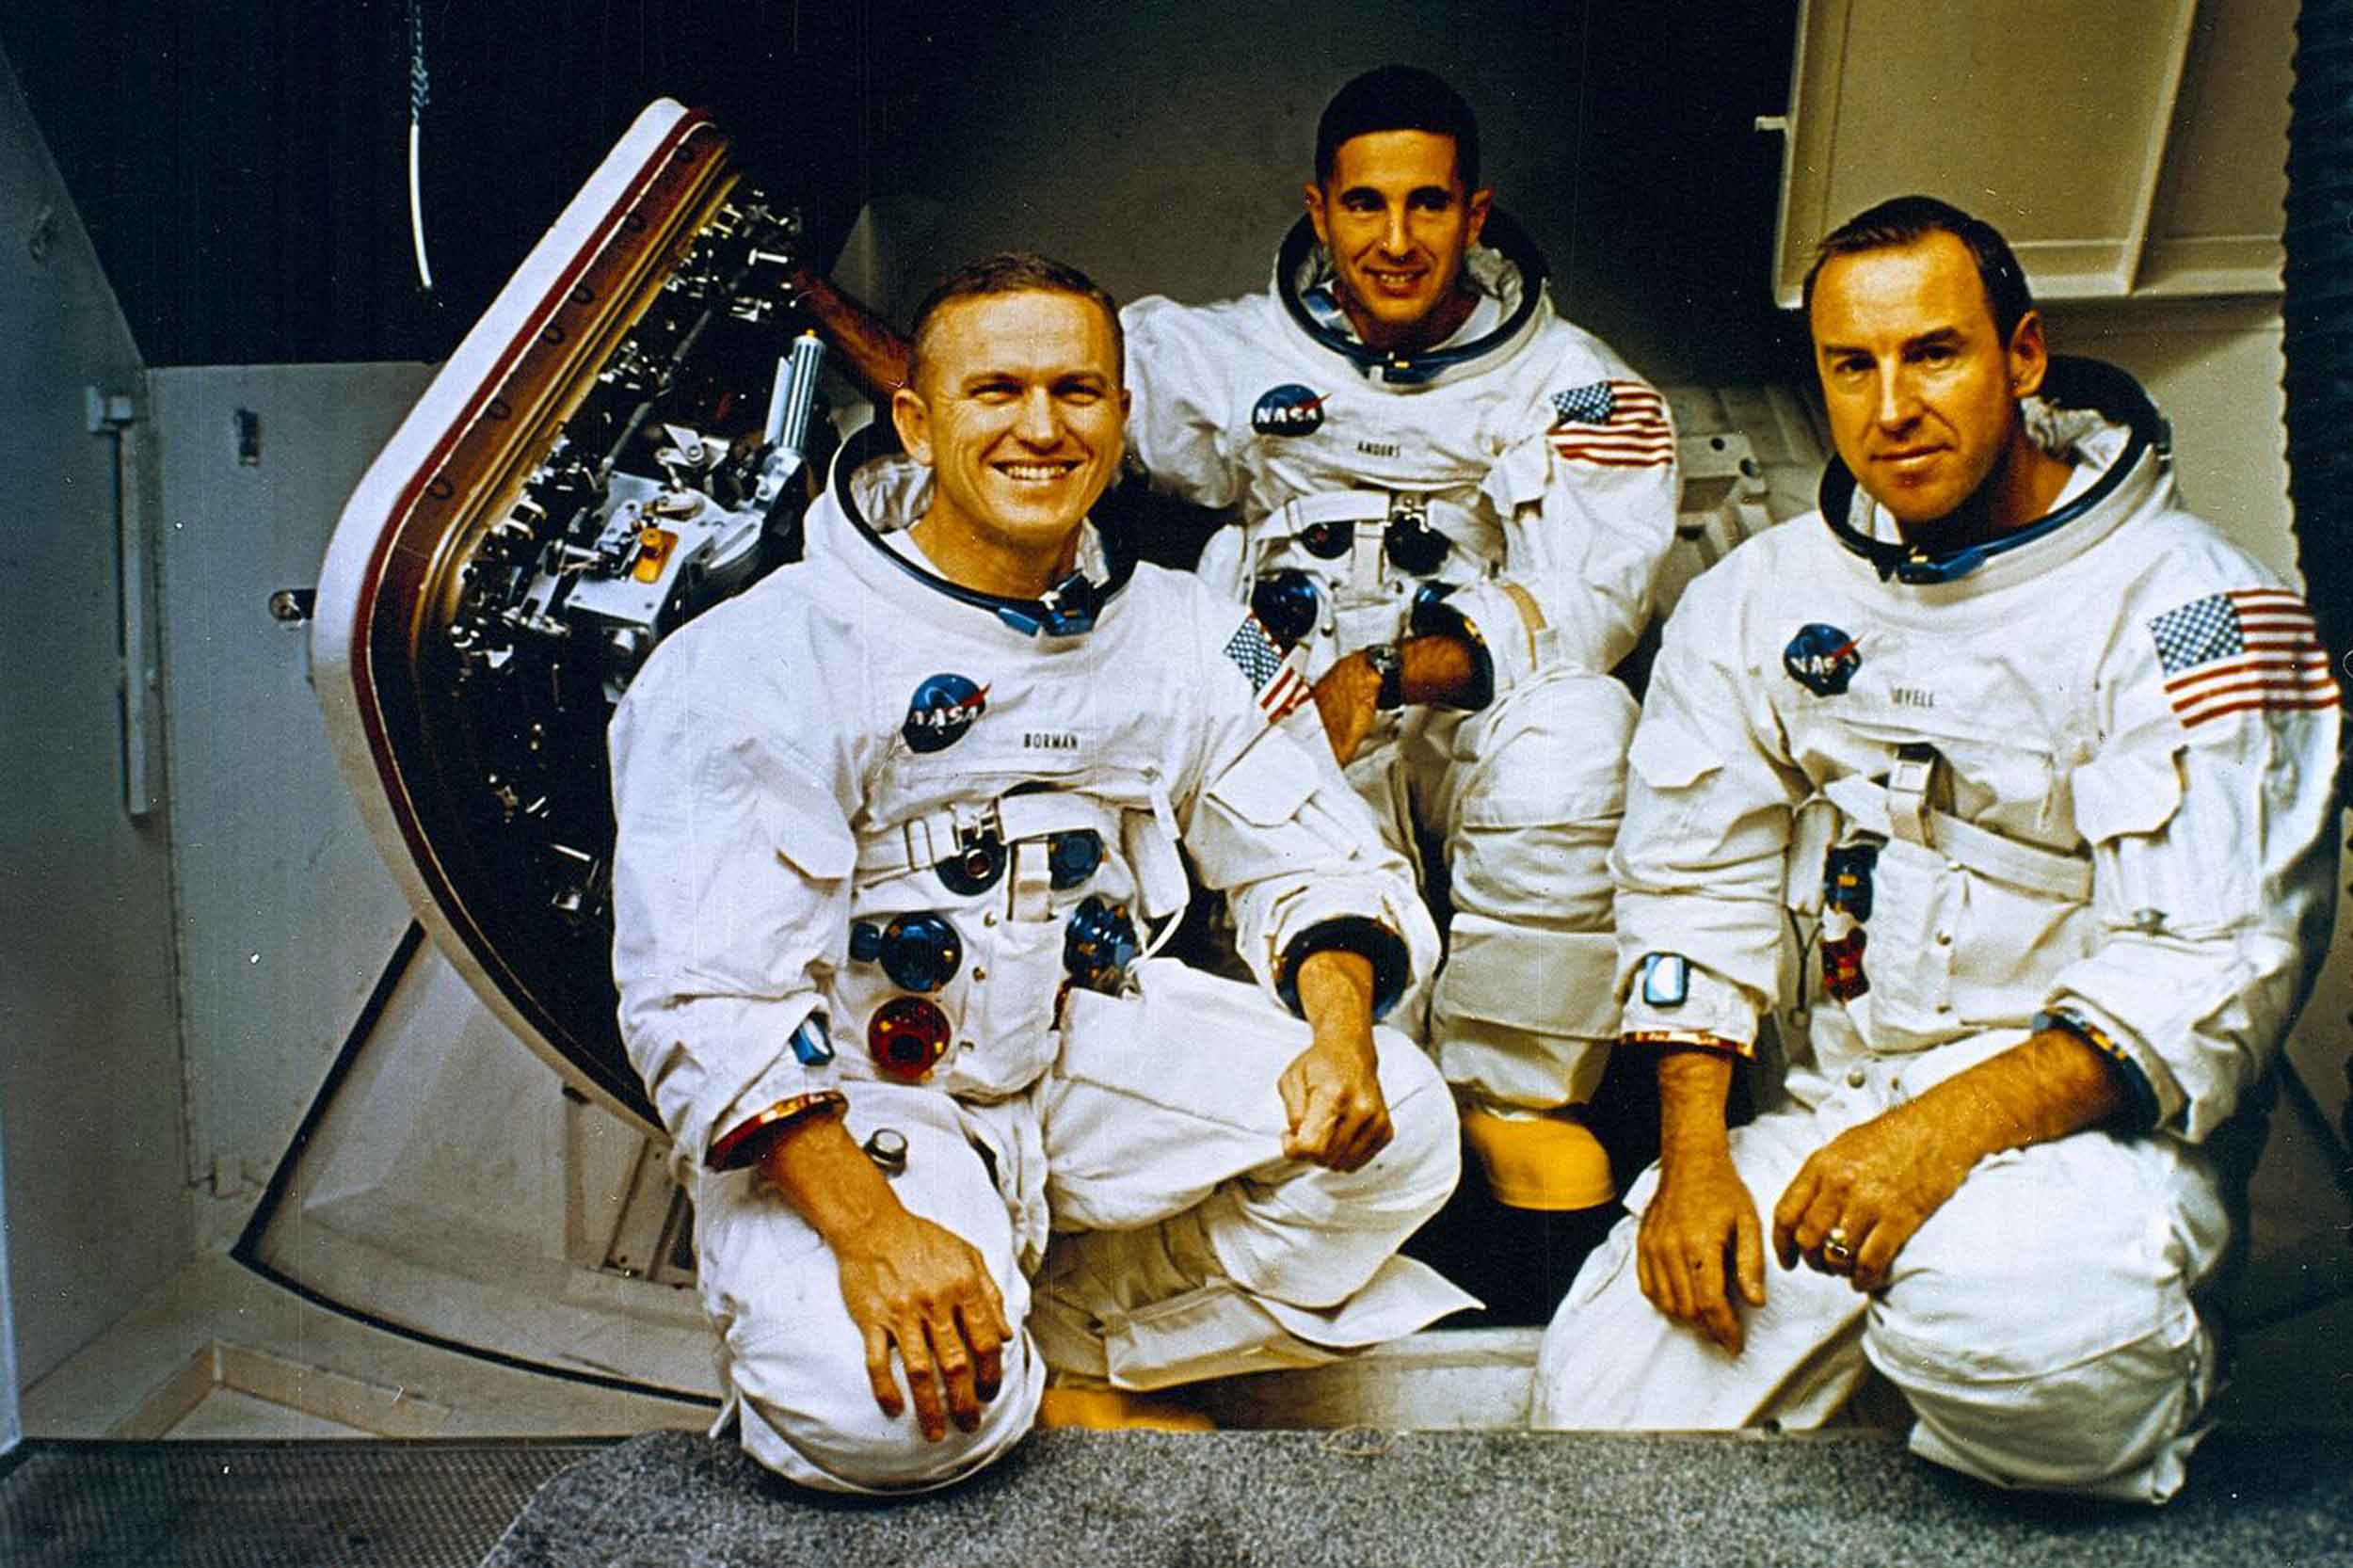 The Apollo 8 Crew (L to R) Frank Borman, commander; William Anders, Lunar Module (LM) Pilot; and James Lovell, Command Module (CM) pilot pose in front of the Apollo mission simulator during training. The three served as the crew for the first manned Apollo mission launched aboard the Saturn V and first manned Apollo craft to enter lunar orbit. Photo: NASA